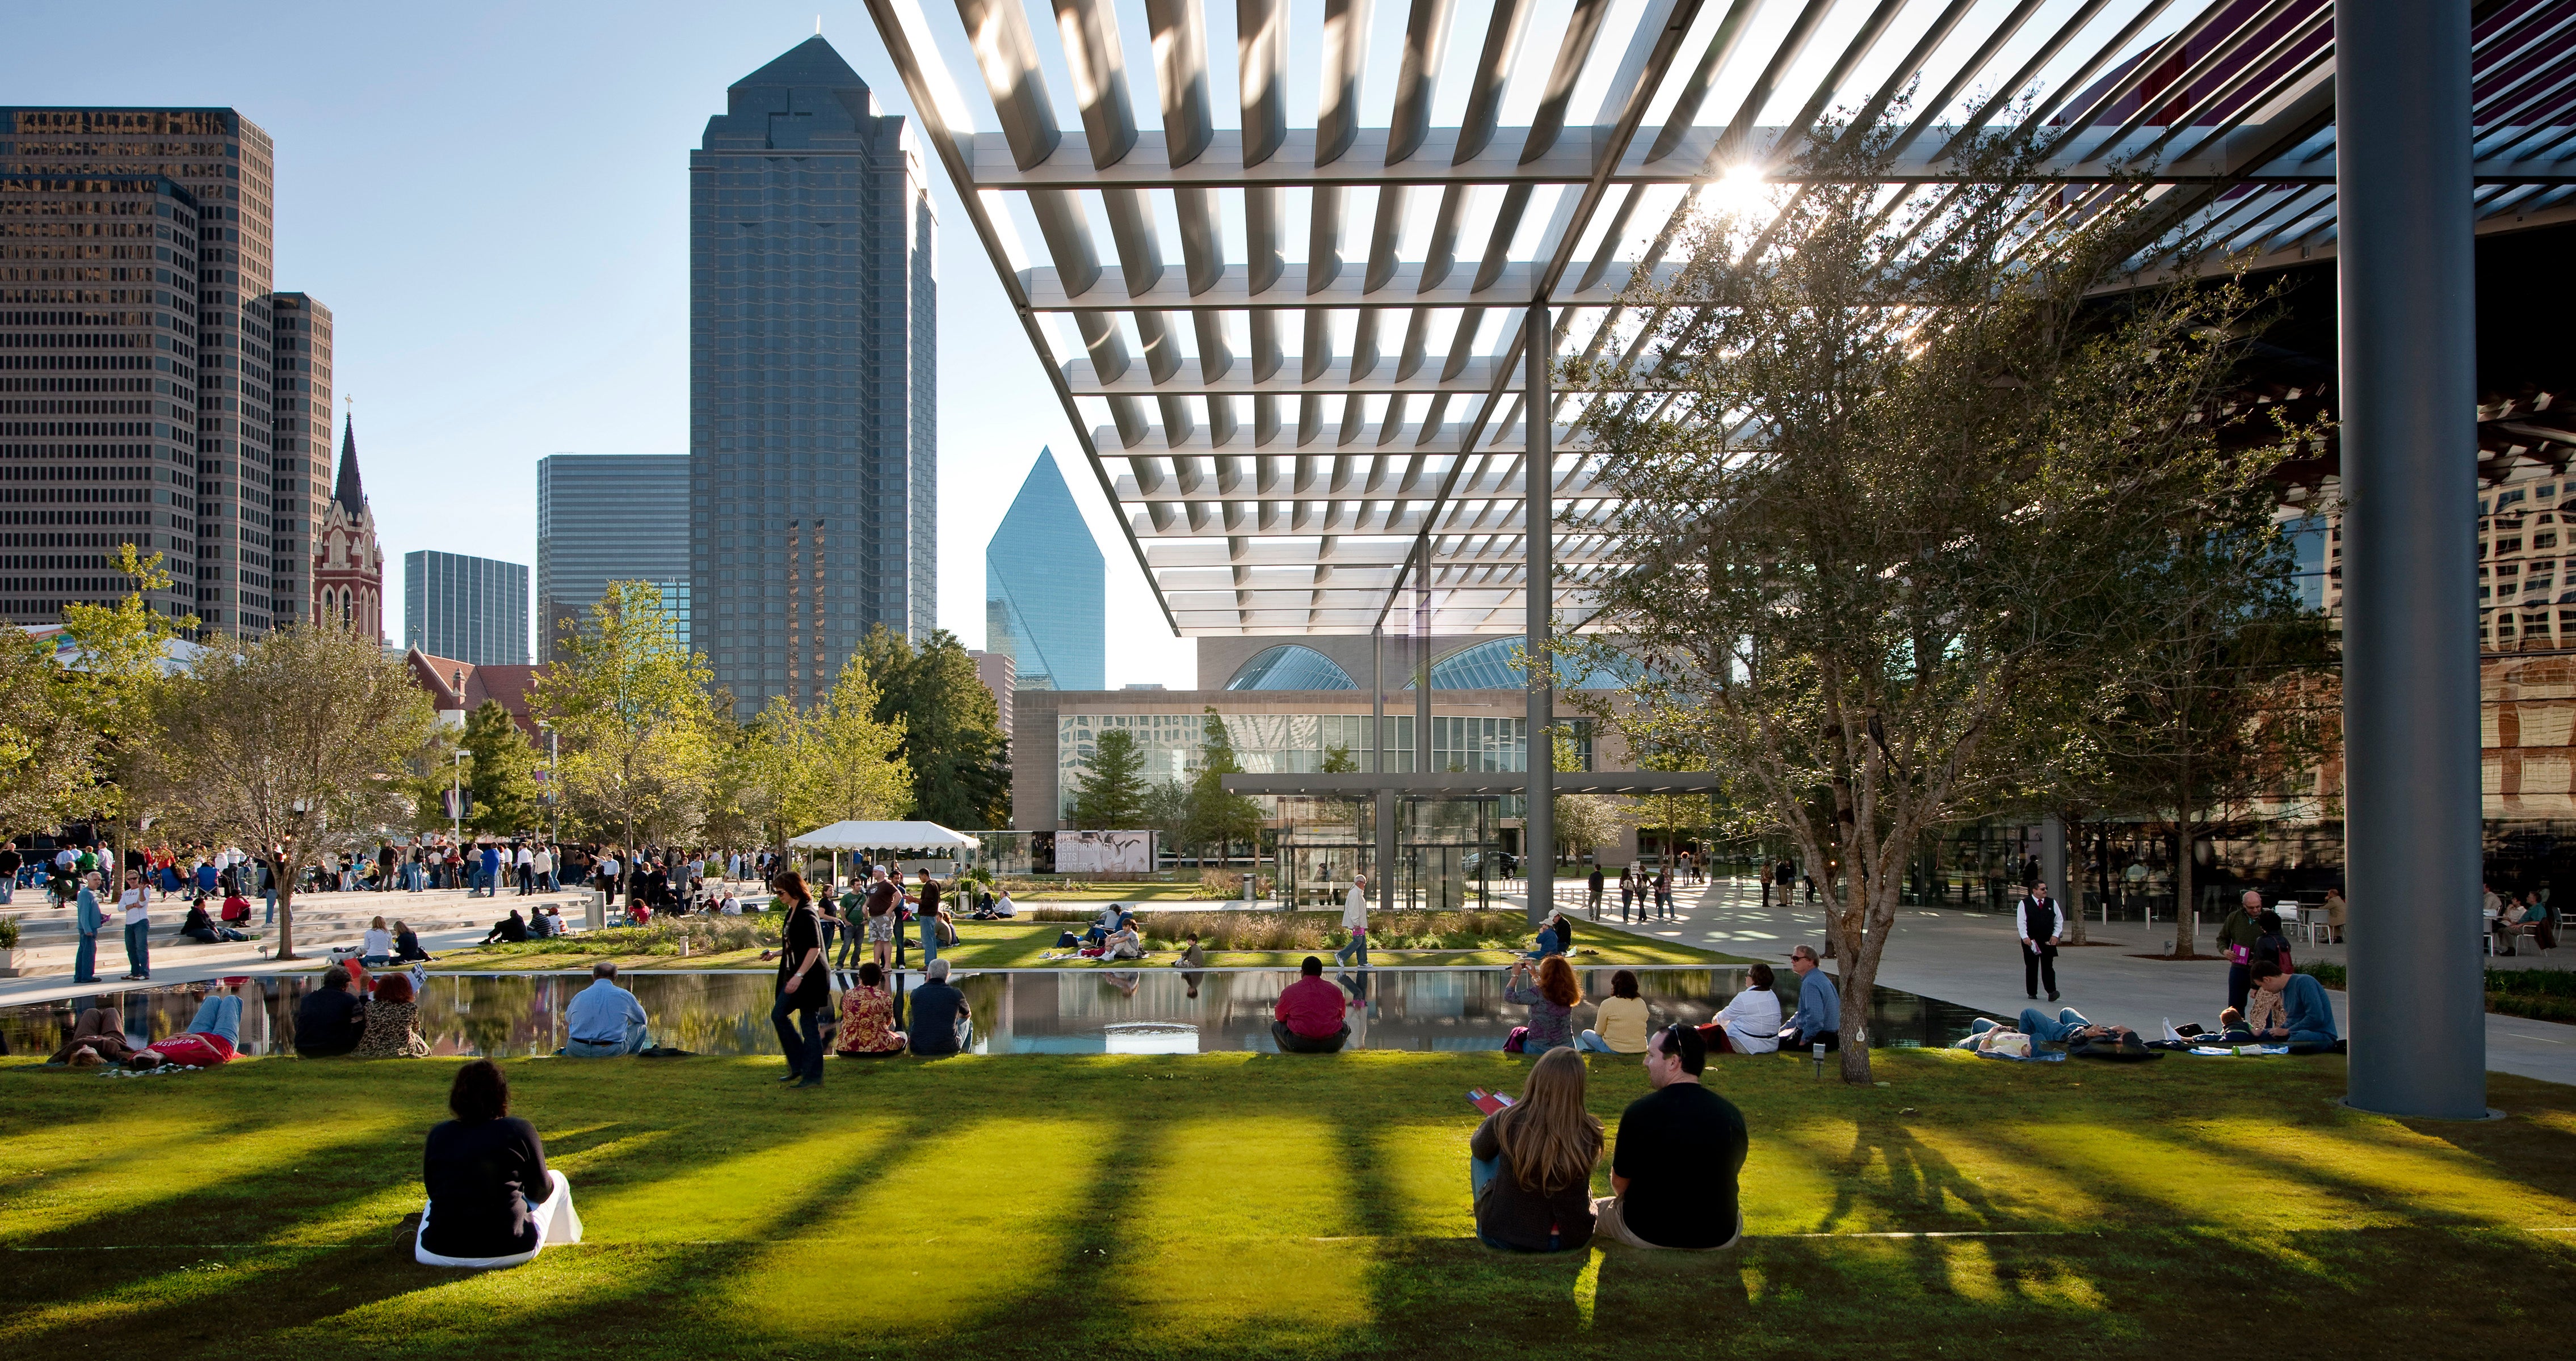 Spoil yourself with a trip to warm, welcoming Dallas